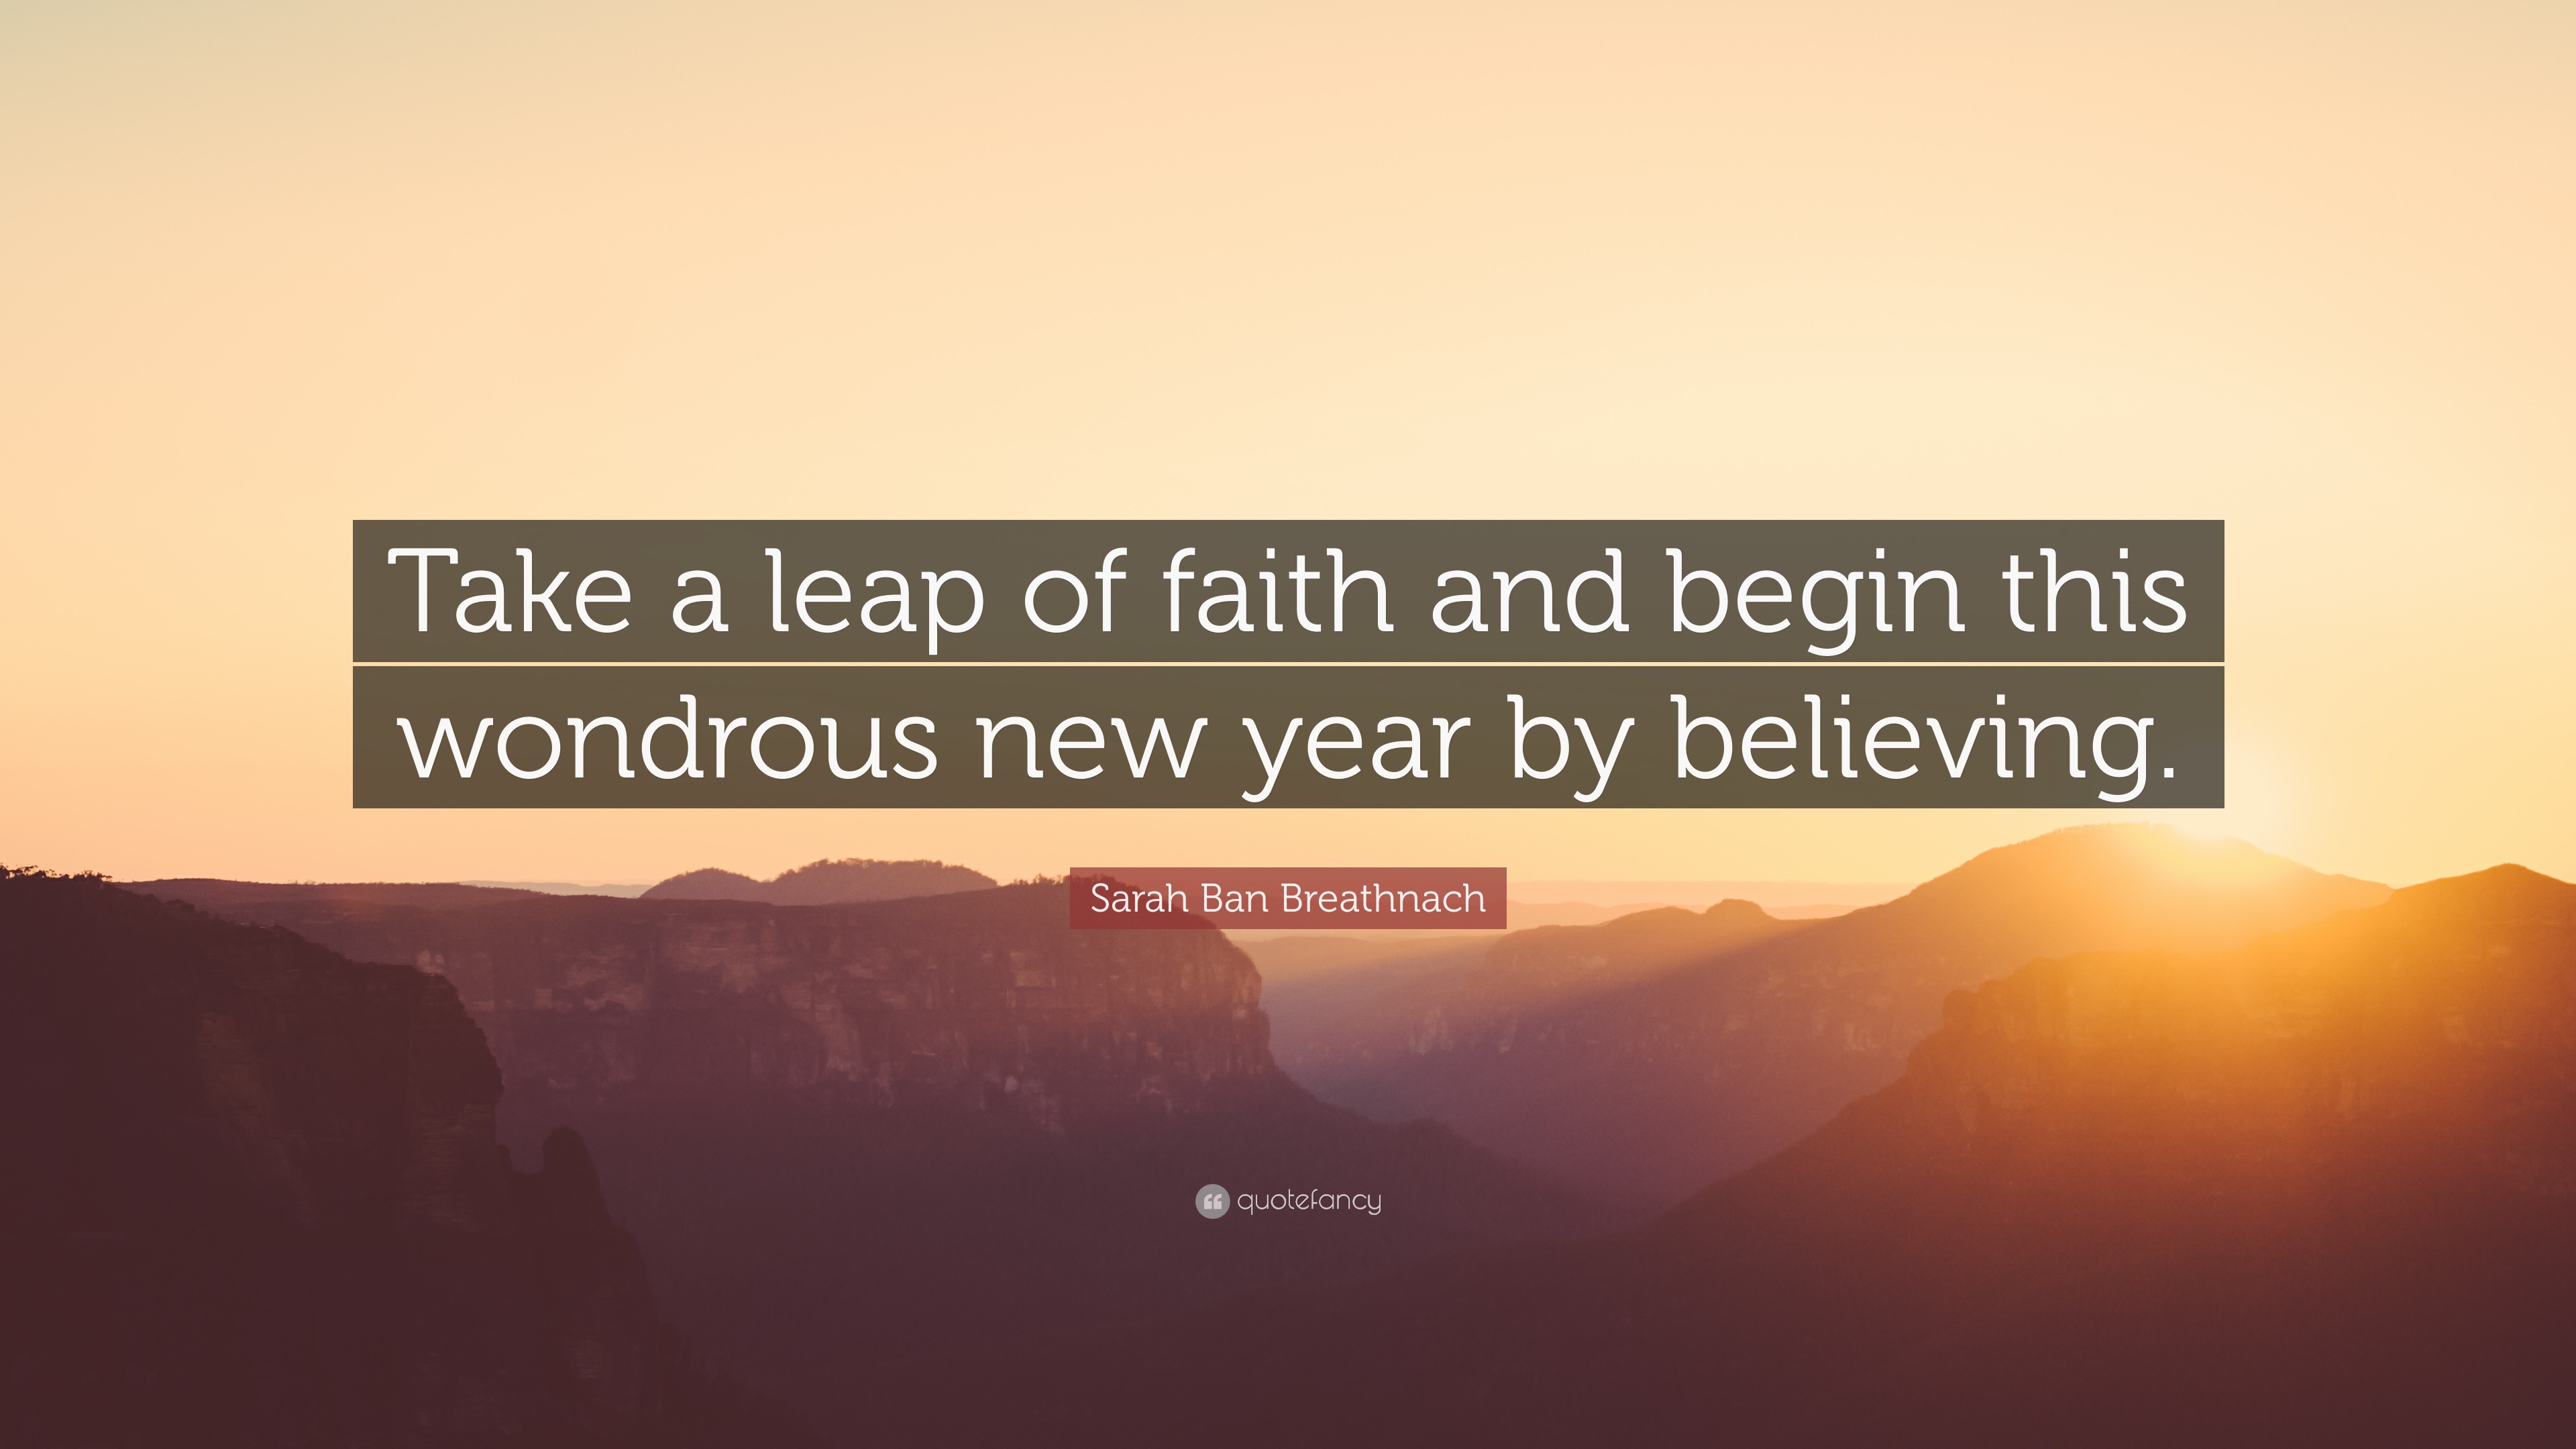 Sarah Ban Breathnach Quote Take A Leap Of Faith And Begin This Wondrous New Year By